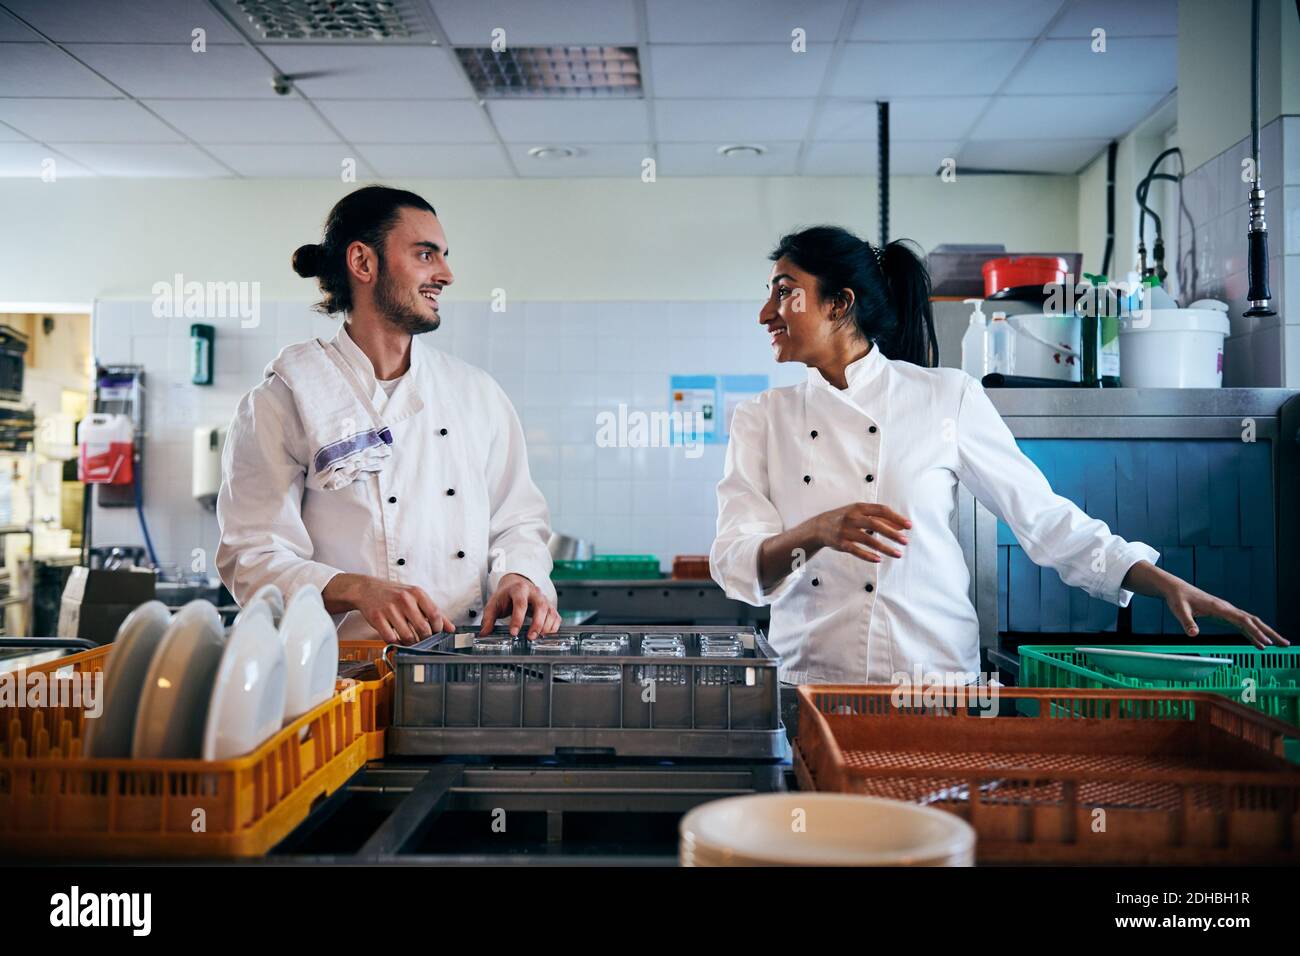 Male and female chefs communicating while arranging utensils in kitchen Stock Photo